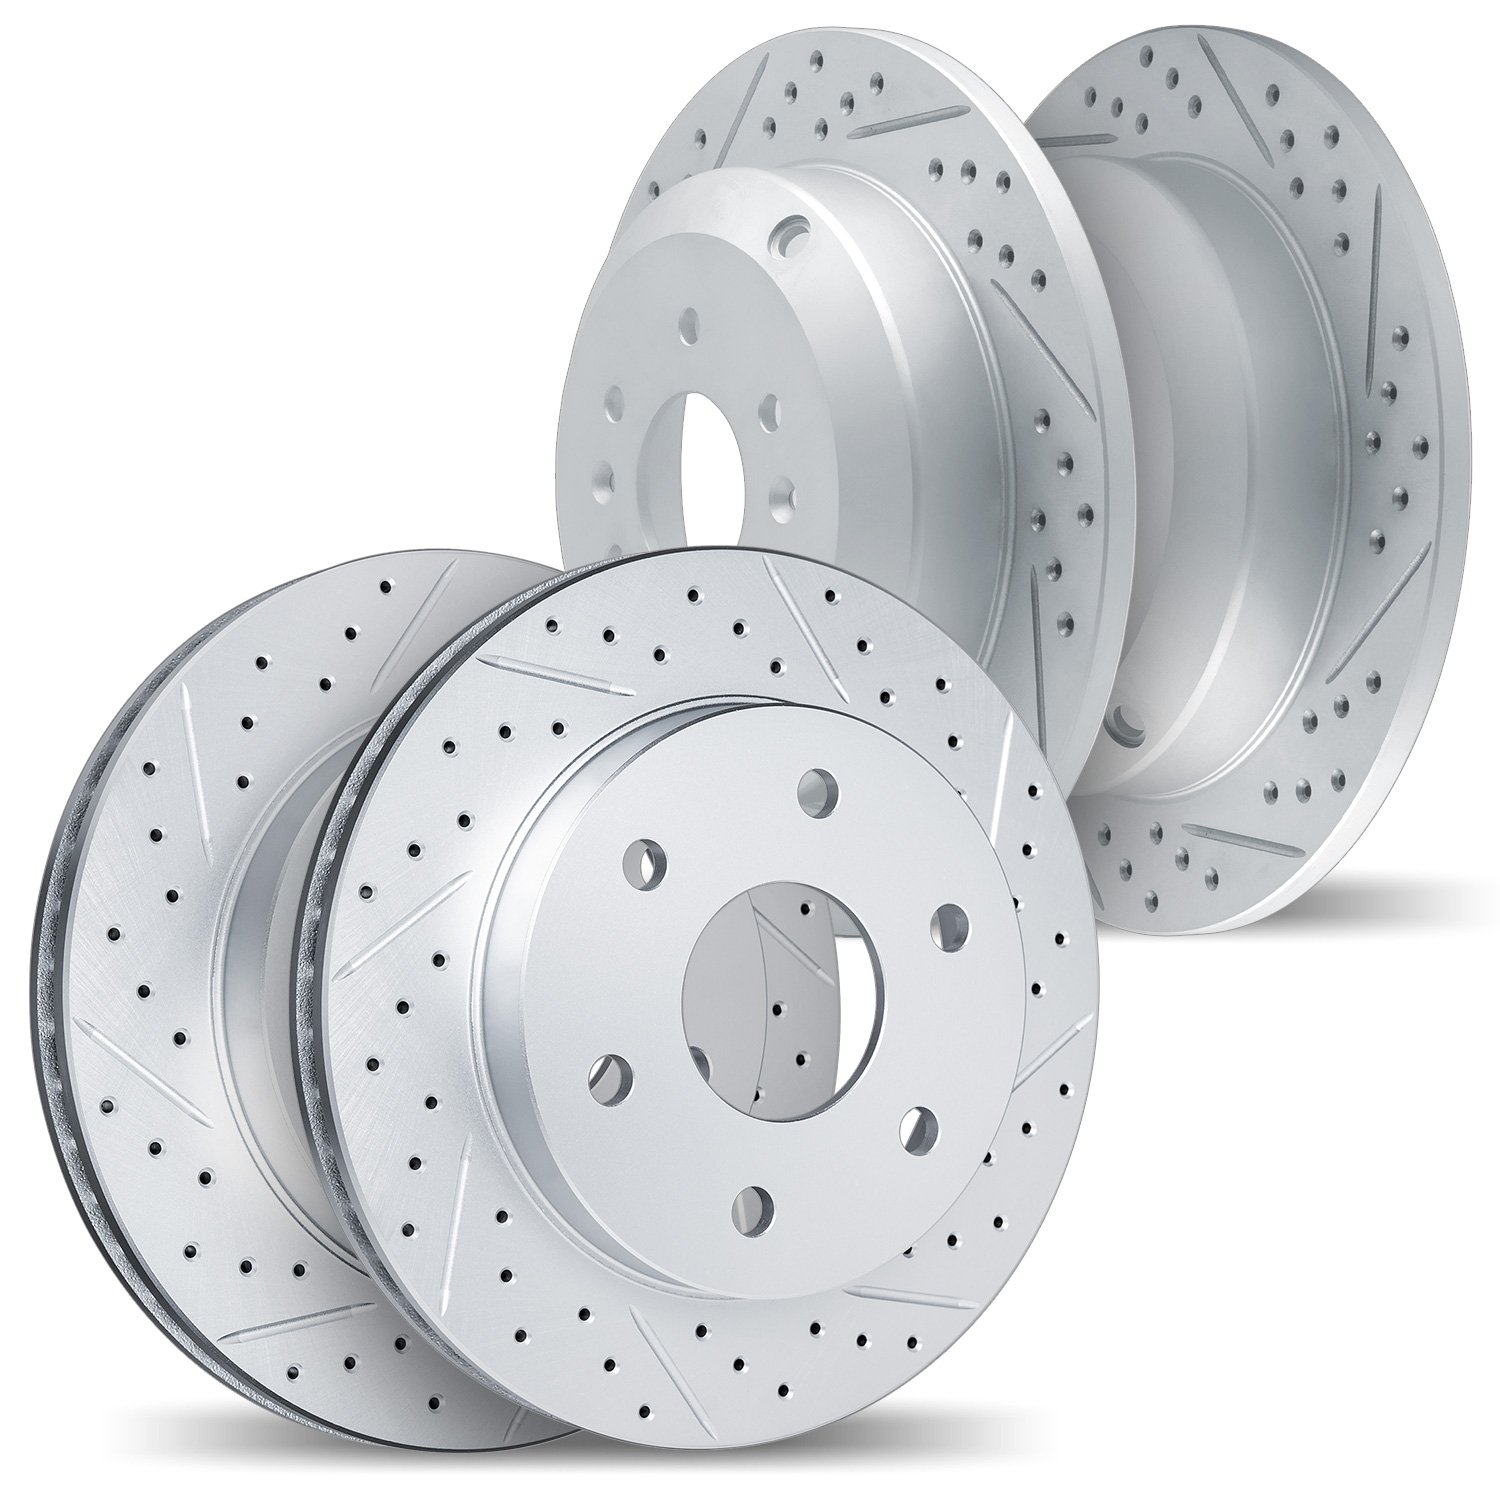 2004-67018 Geoperformance Drilled/Slotted Brake Rotors, 2007-2015 Infiniti/Nissan, Position: Front and Rear